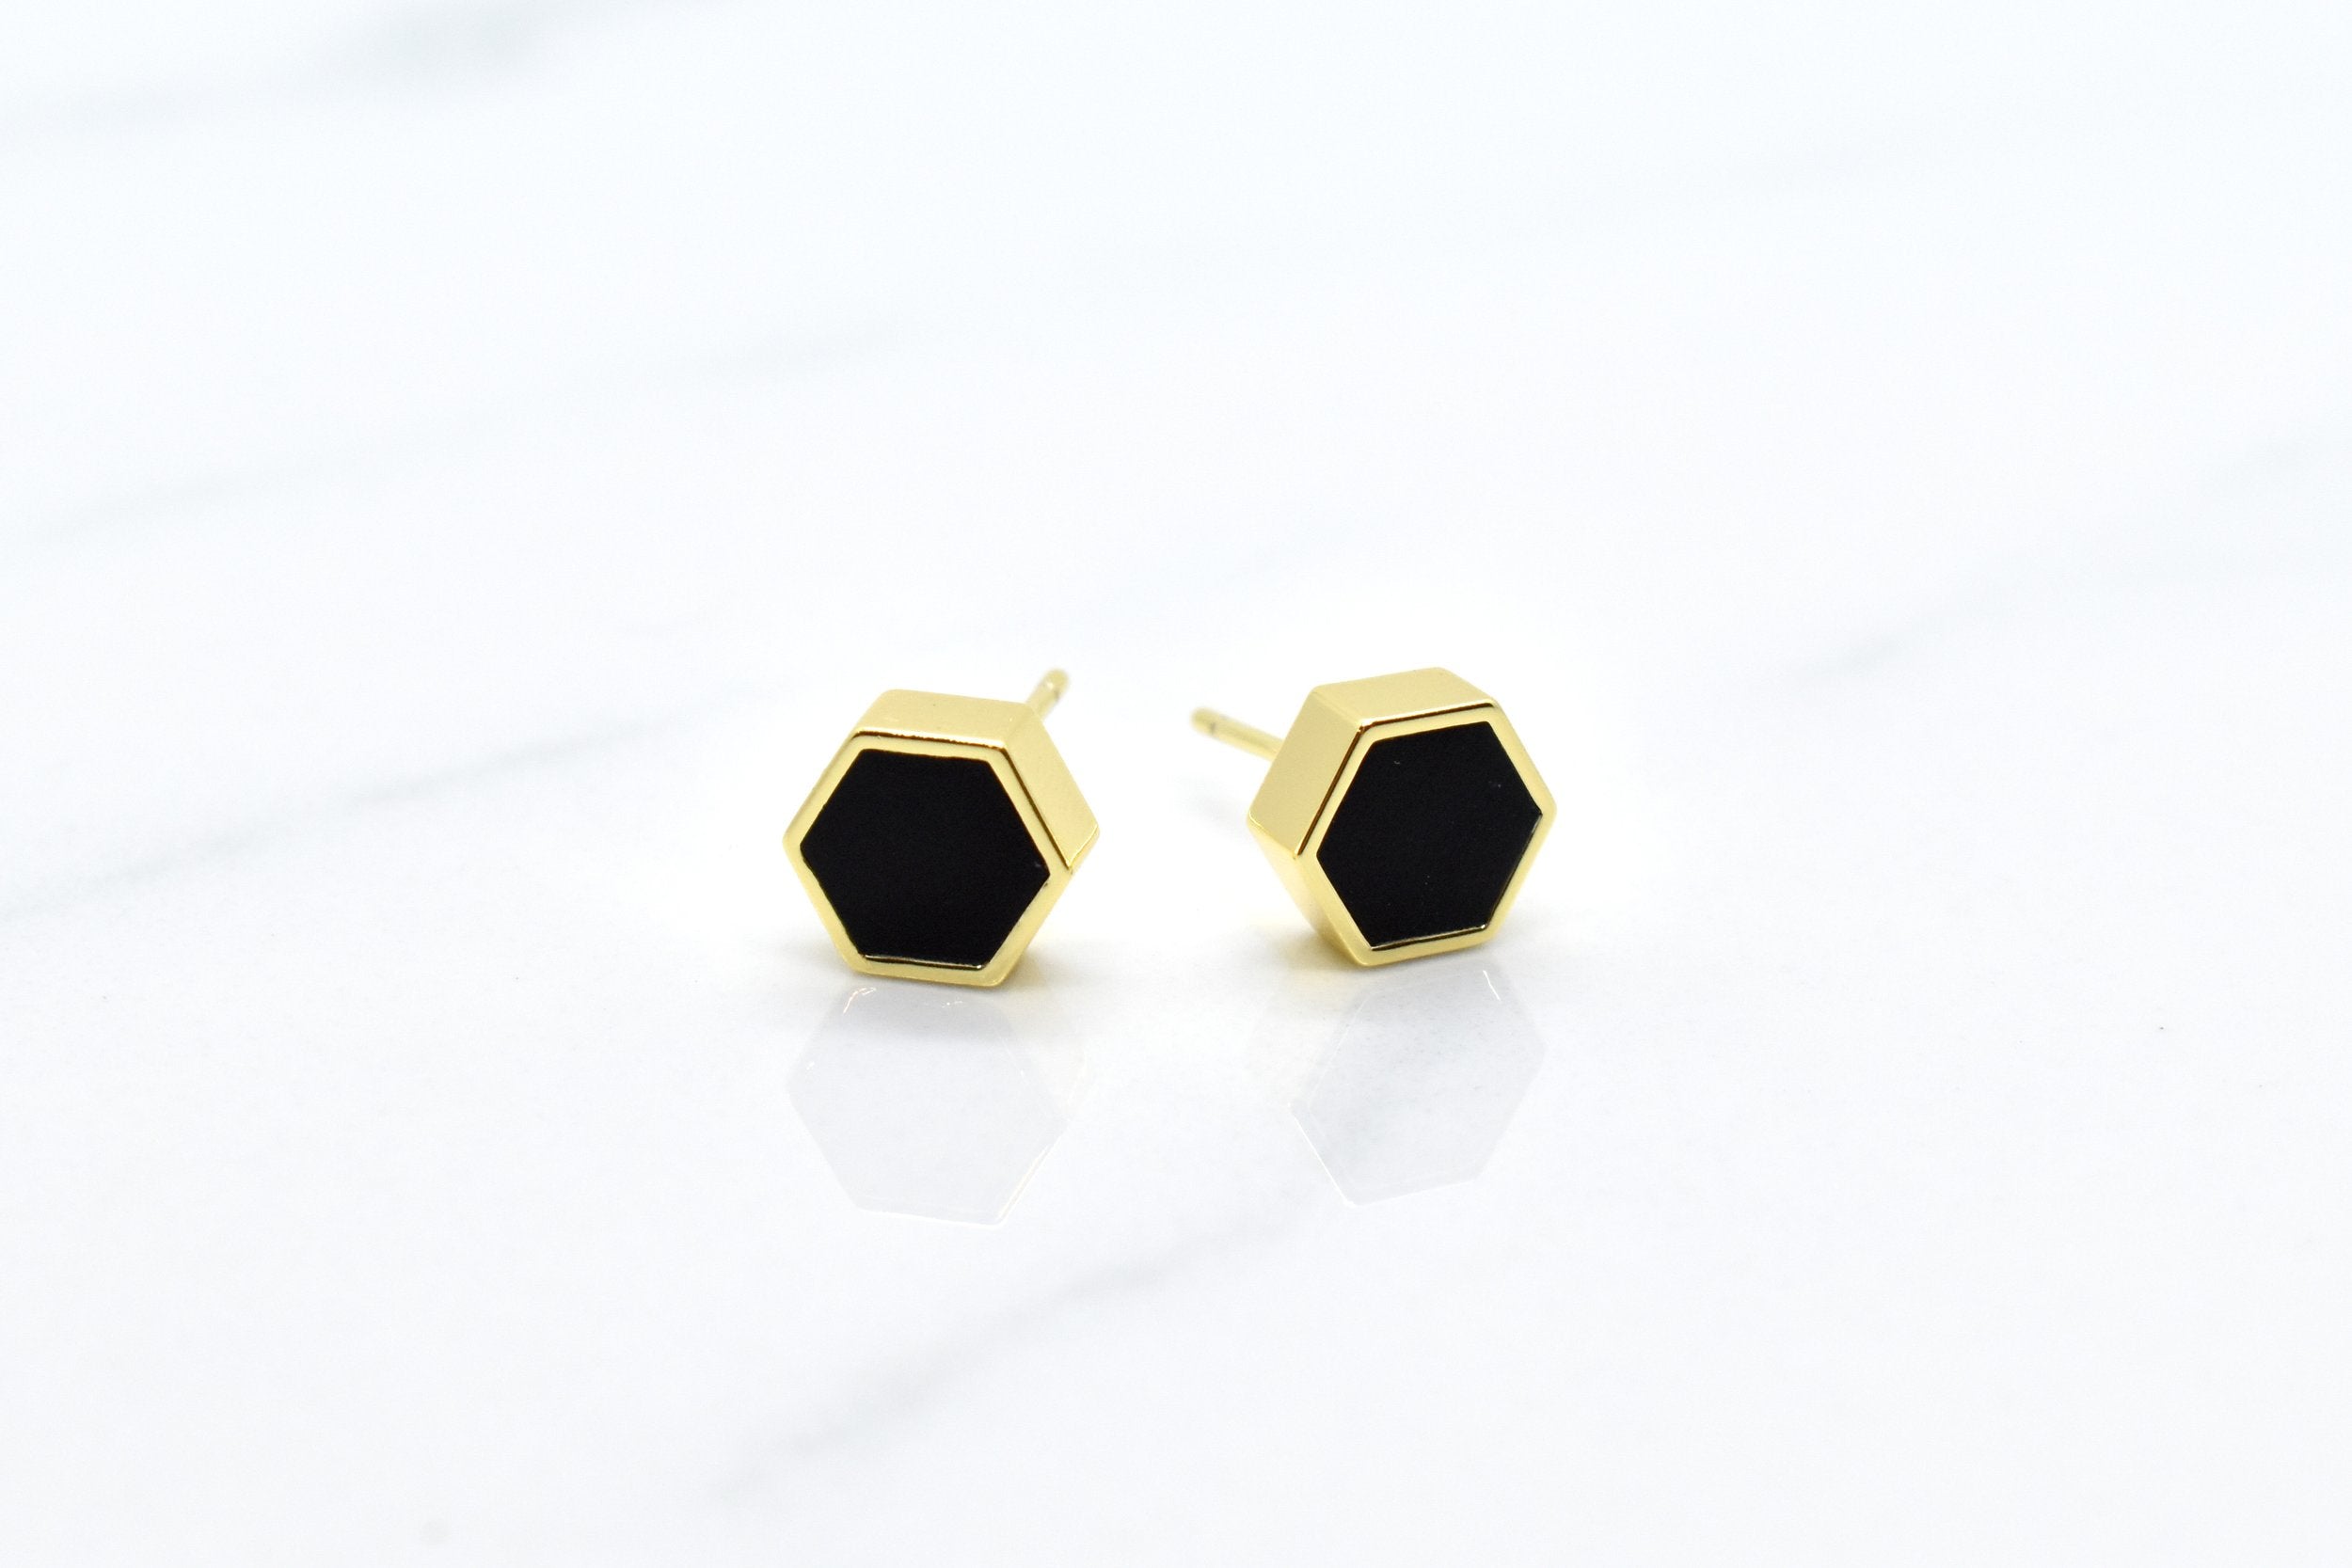 Triangle Stud Earrings in 14k Gold and Black – Cold Gold